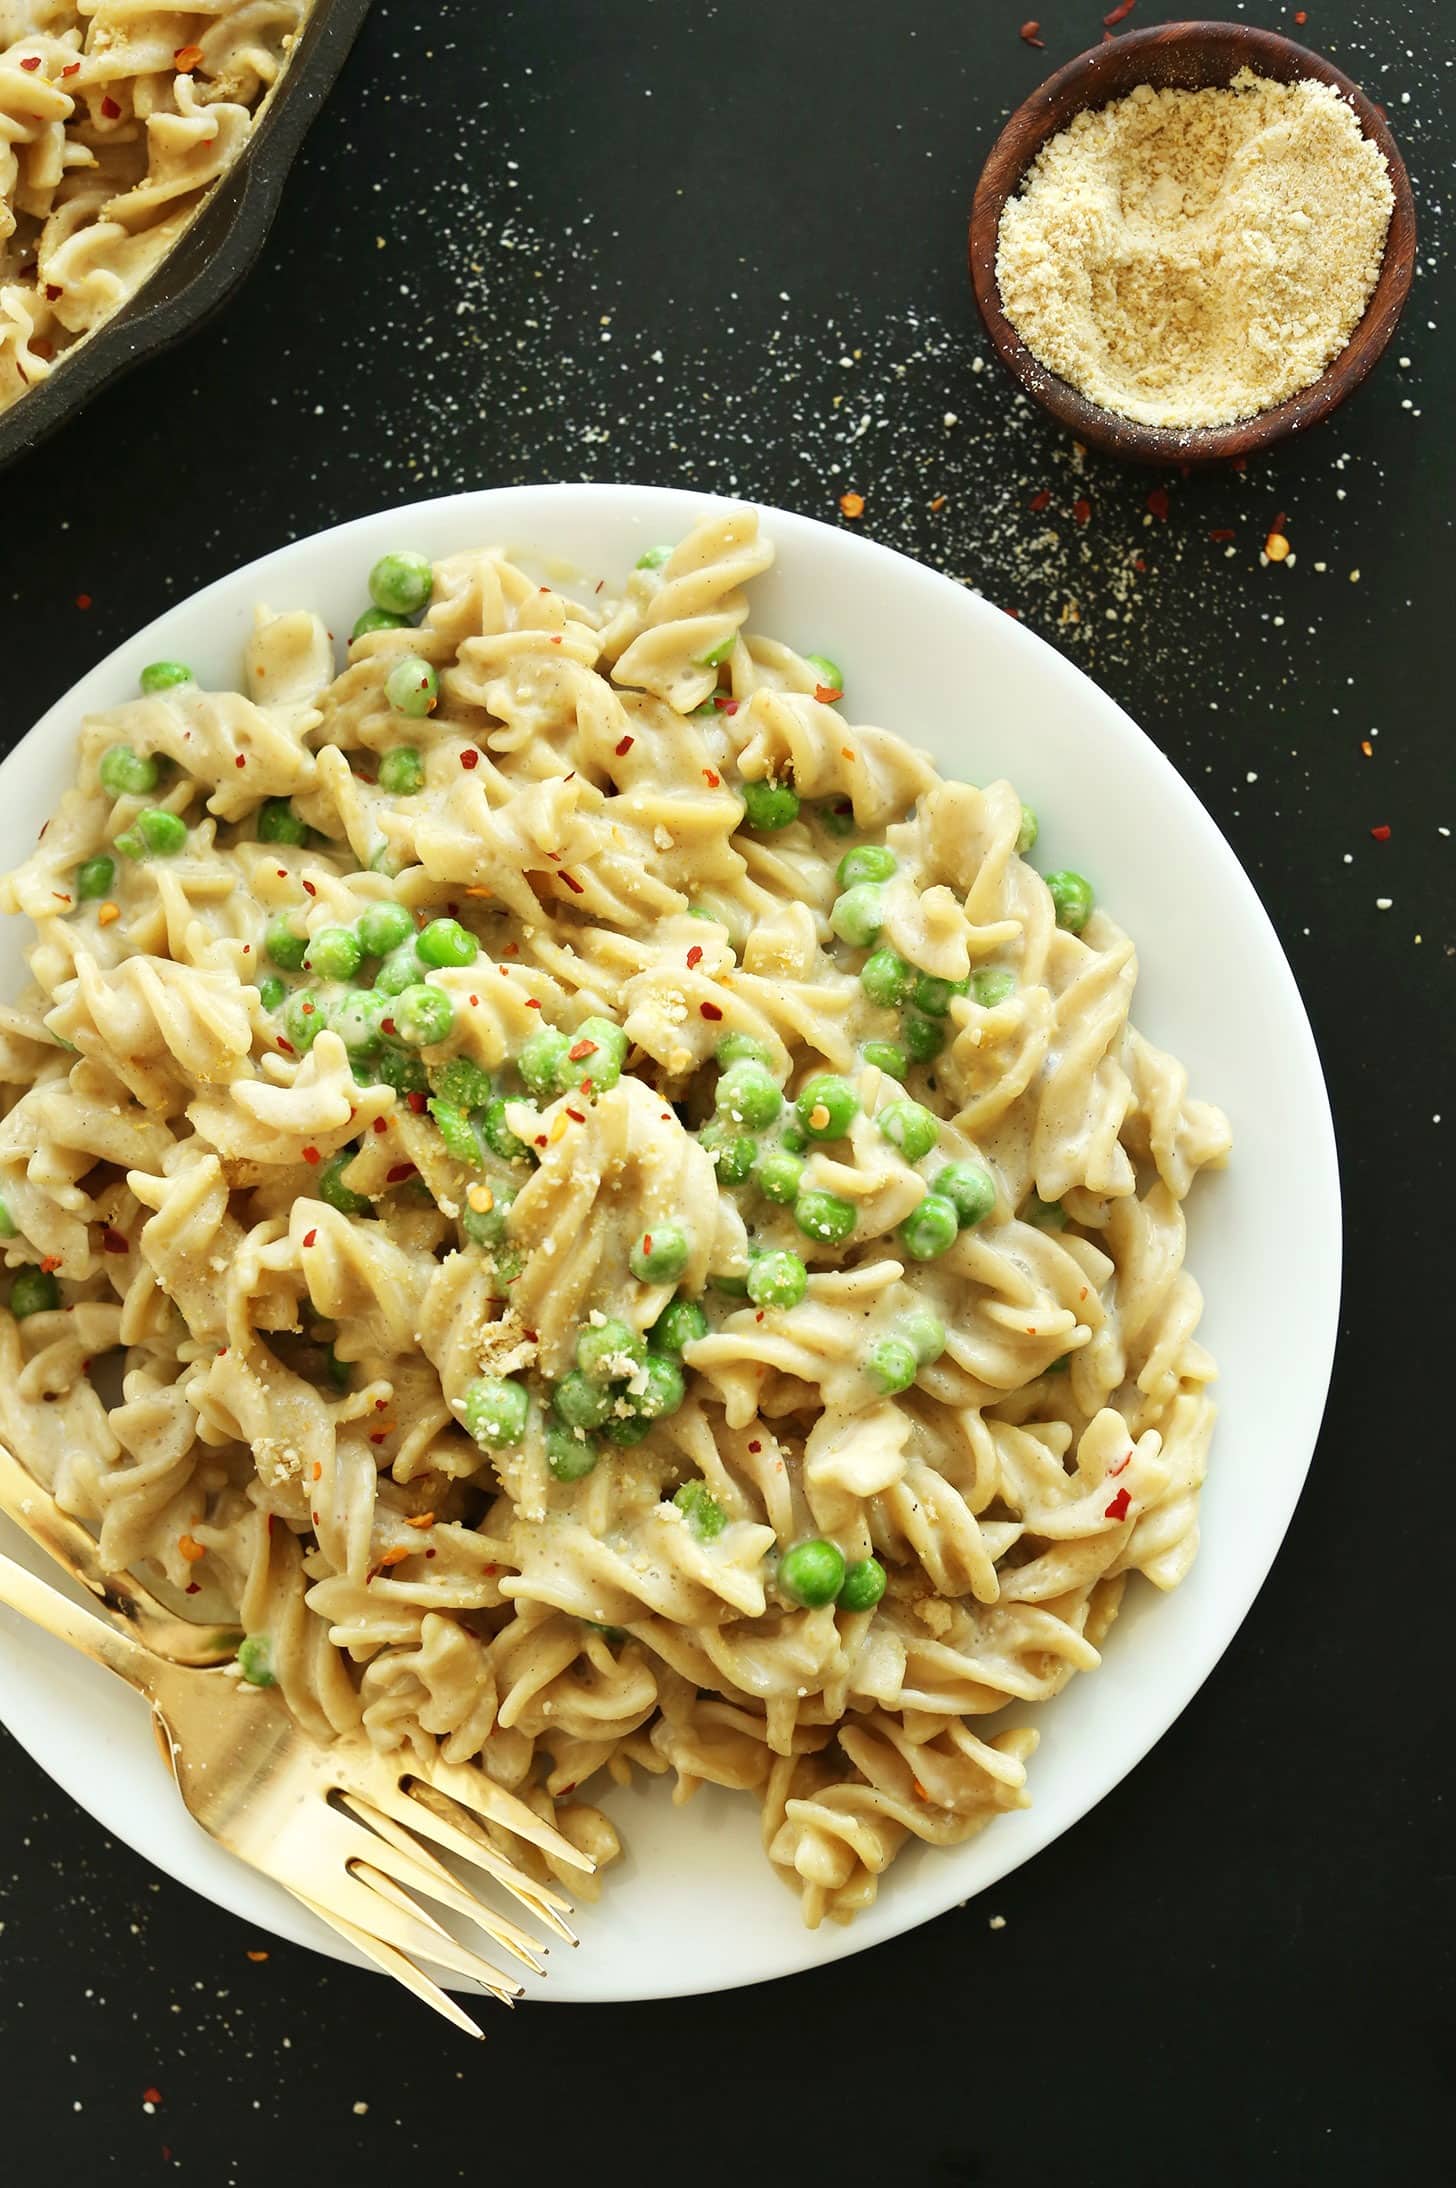 Pasta in Alfredo sauce with green peas and spices.